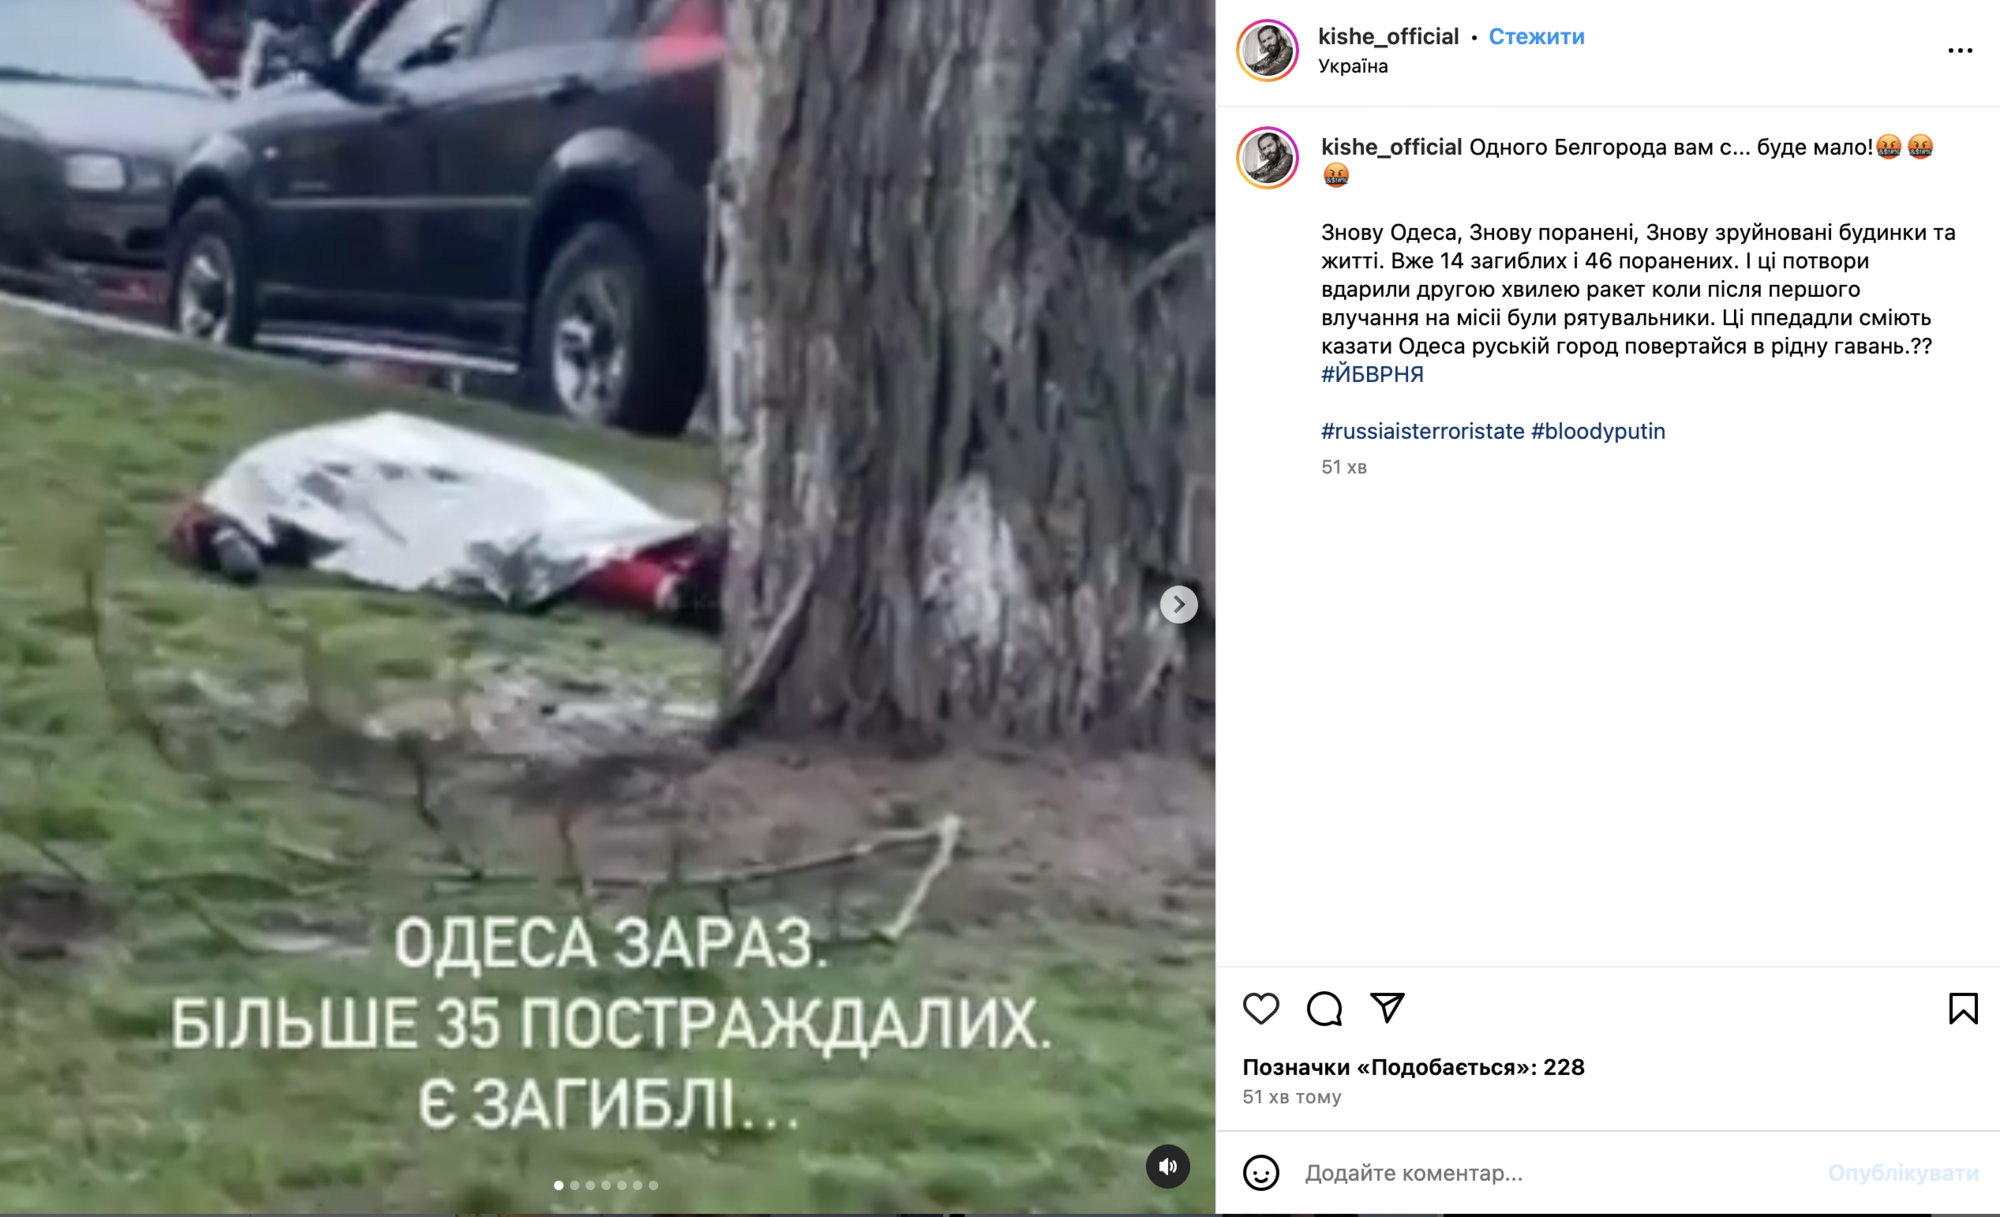 ''When will that devil gorge himself?!'' Ukrainian stars reacted with pain and hatred to Russia's missile attack on Odesa